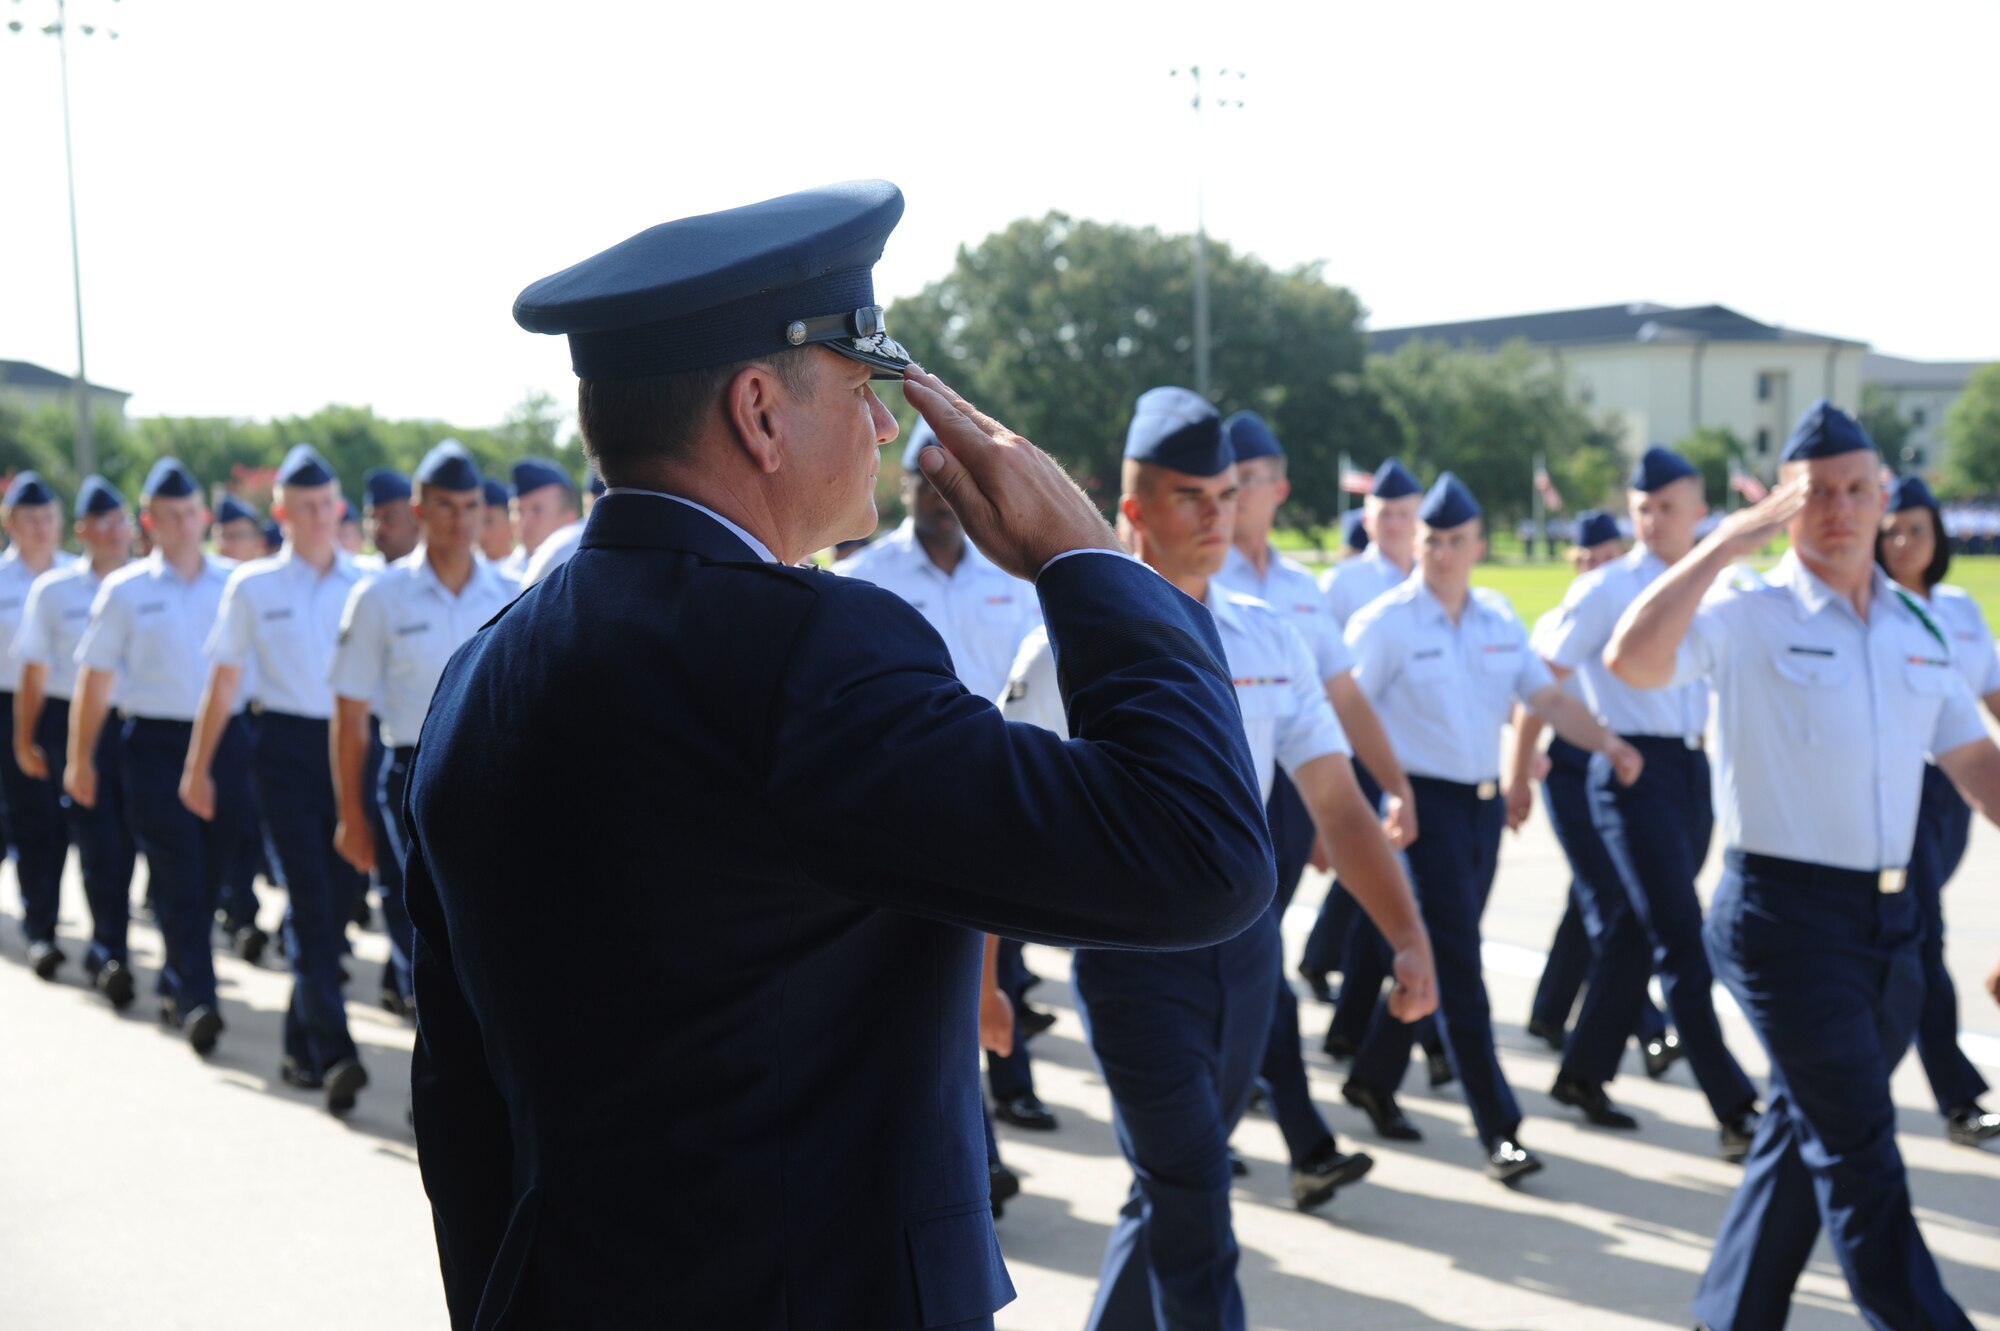 Maj. Gen. Leonard Patrick, outgoing 2nd Air Force commander, renders a salute as troops march during pass and review following the 2nd Air Force change of command ceremony July 3, 2014, at Keesler Air Force Base, Miss.  Patrick is replaced by Brig. Gen. Mark Brown was previously the Financial Management director, Headquarters Air Force Material Command at Wright-Patterson Air Force Base, Ohio. (U.S. Air Force photo by Kemberly Groue)